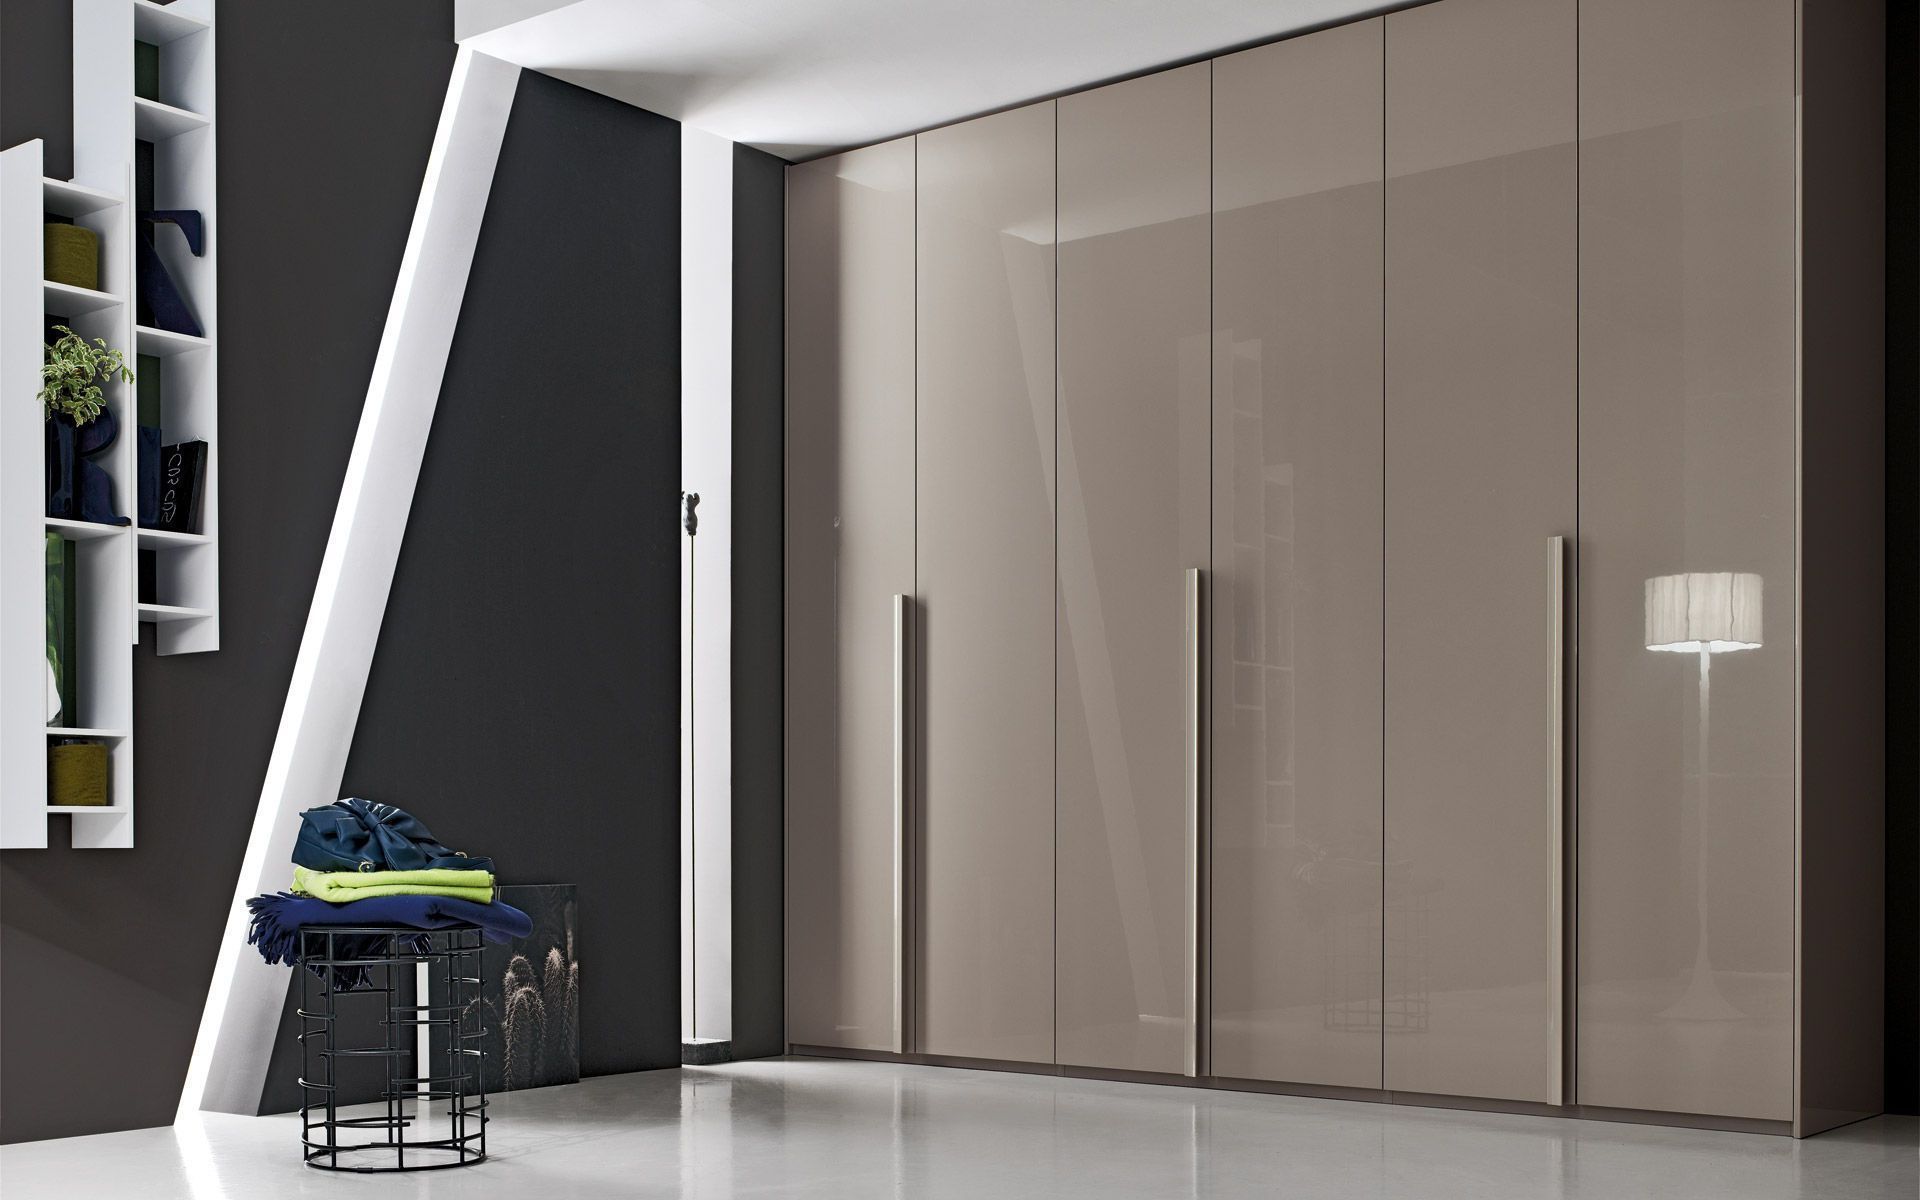 Glossy Laminate Wardrobes, Warranty: More Than 5 Year Within Glossy Wardrobes (View 2 of 20)